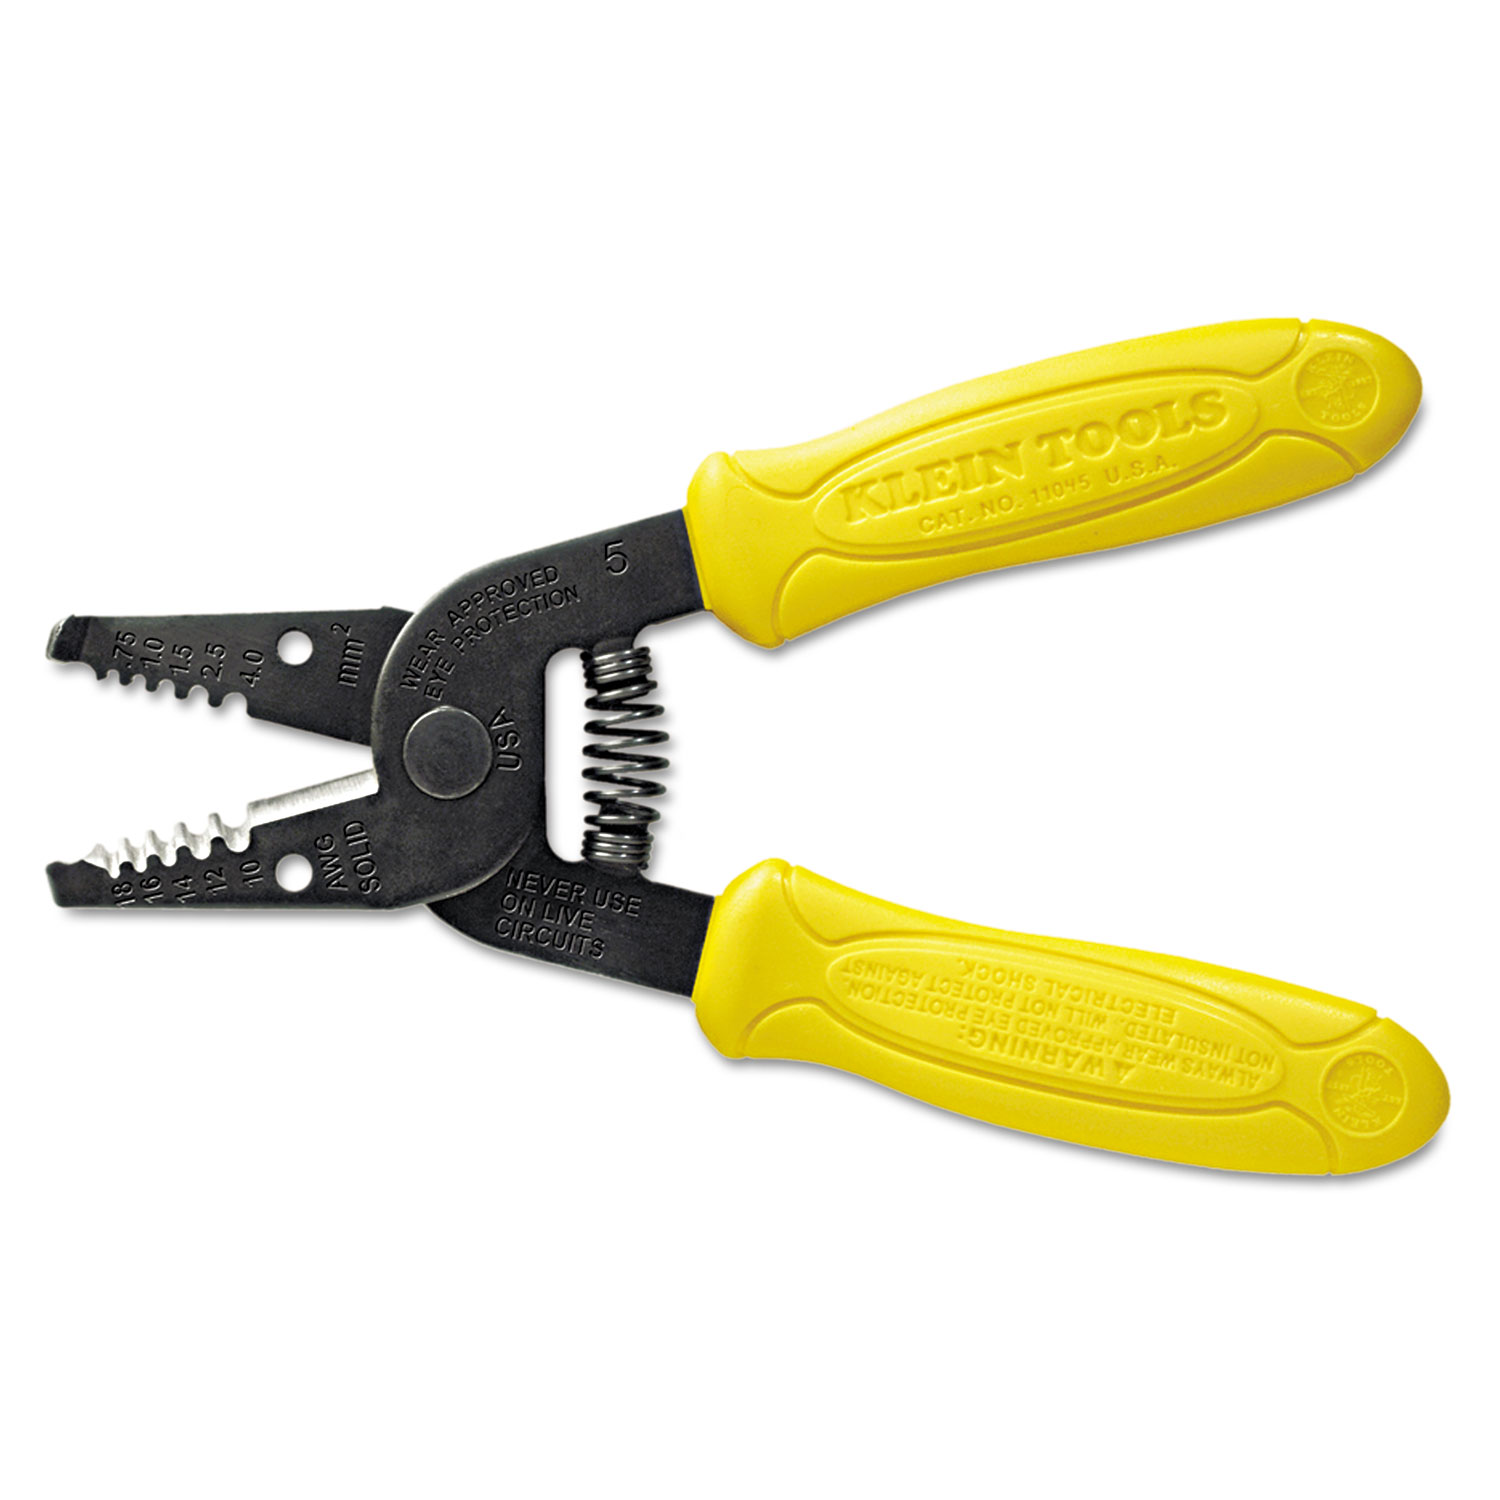 Wire Stripper/Cutter, 10-18 AWG, 6 1/4 Tool Length, Yellow Handle